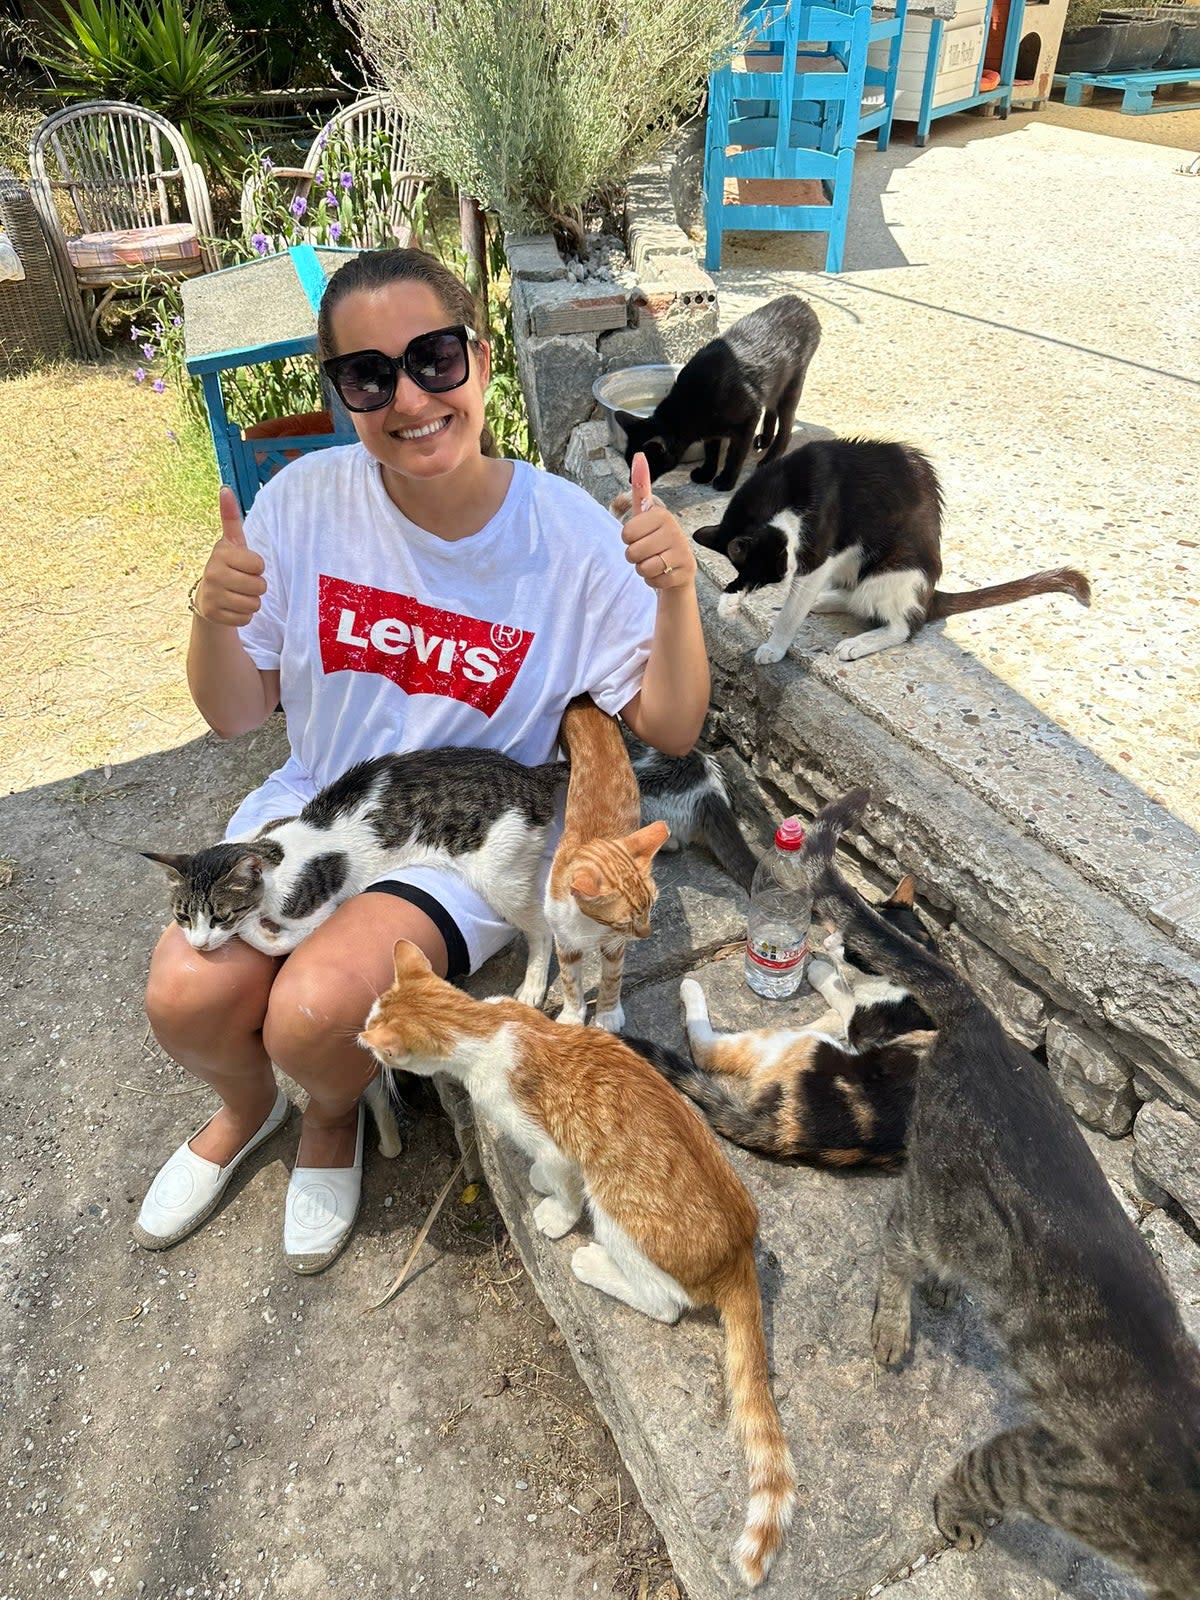 London sales director Jasmine, 31, who is helping teams from Greek Cat Rescue Samos to clear debris to prevent any more wildfires in Greece (Jasmine)